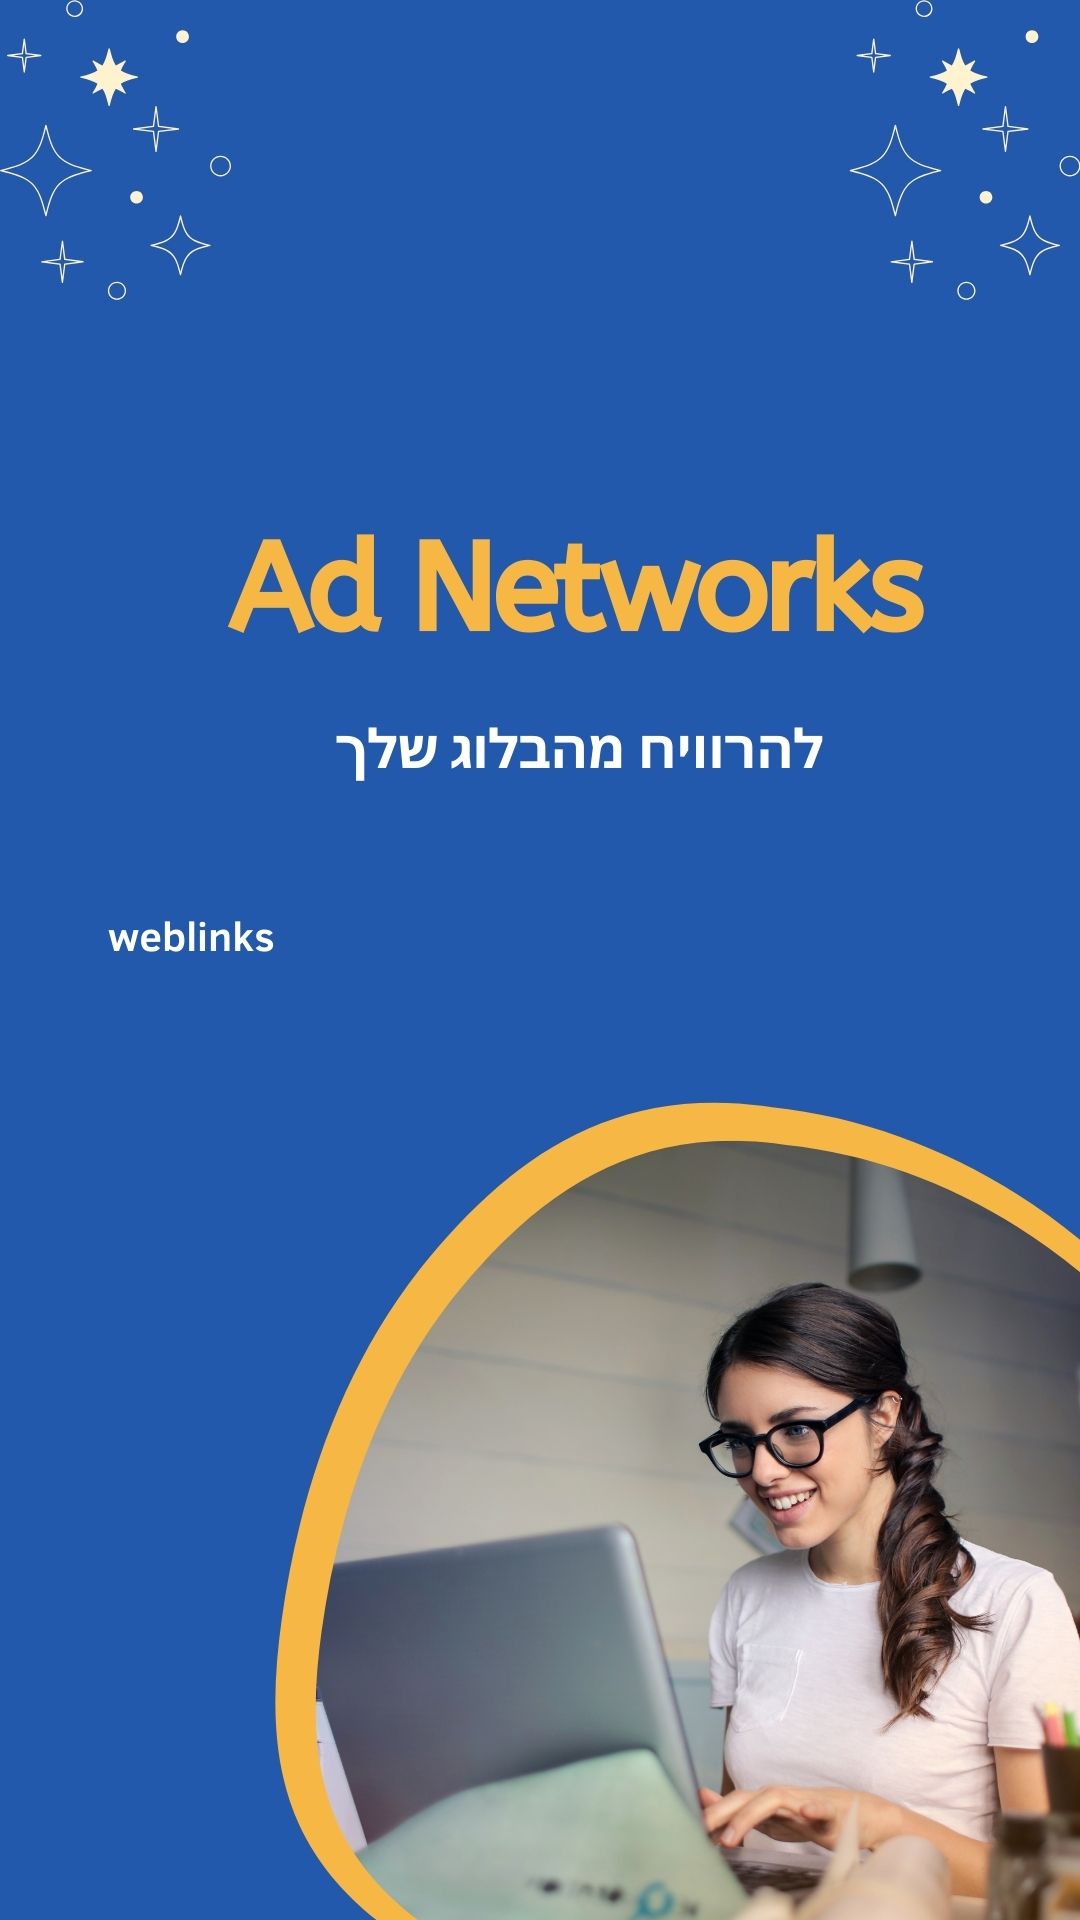 Ad Networks